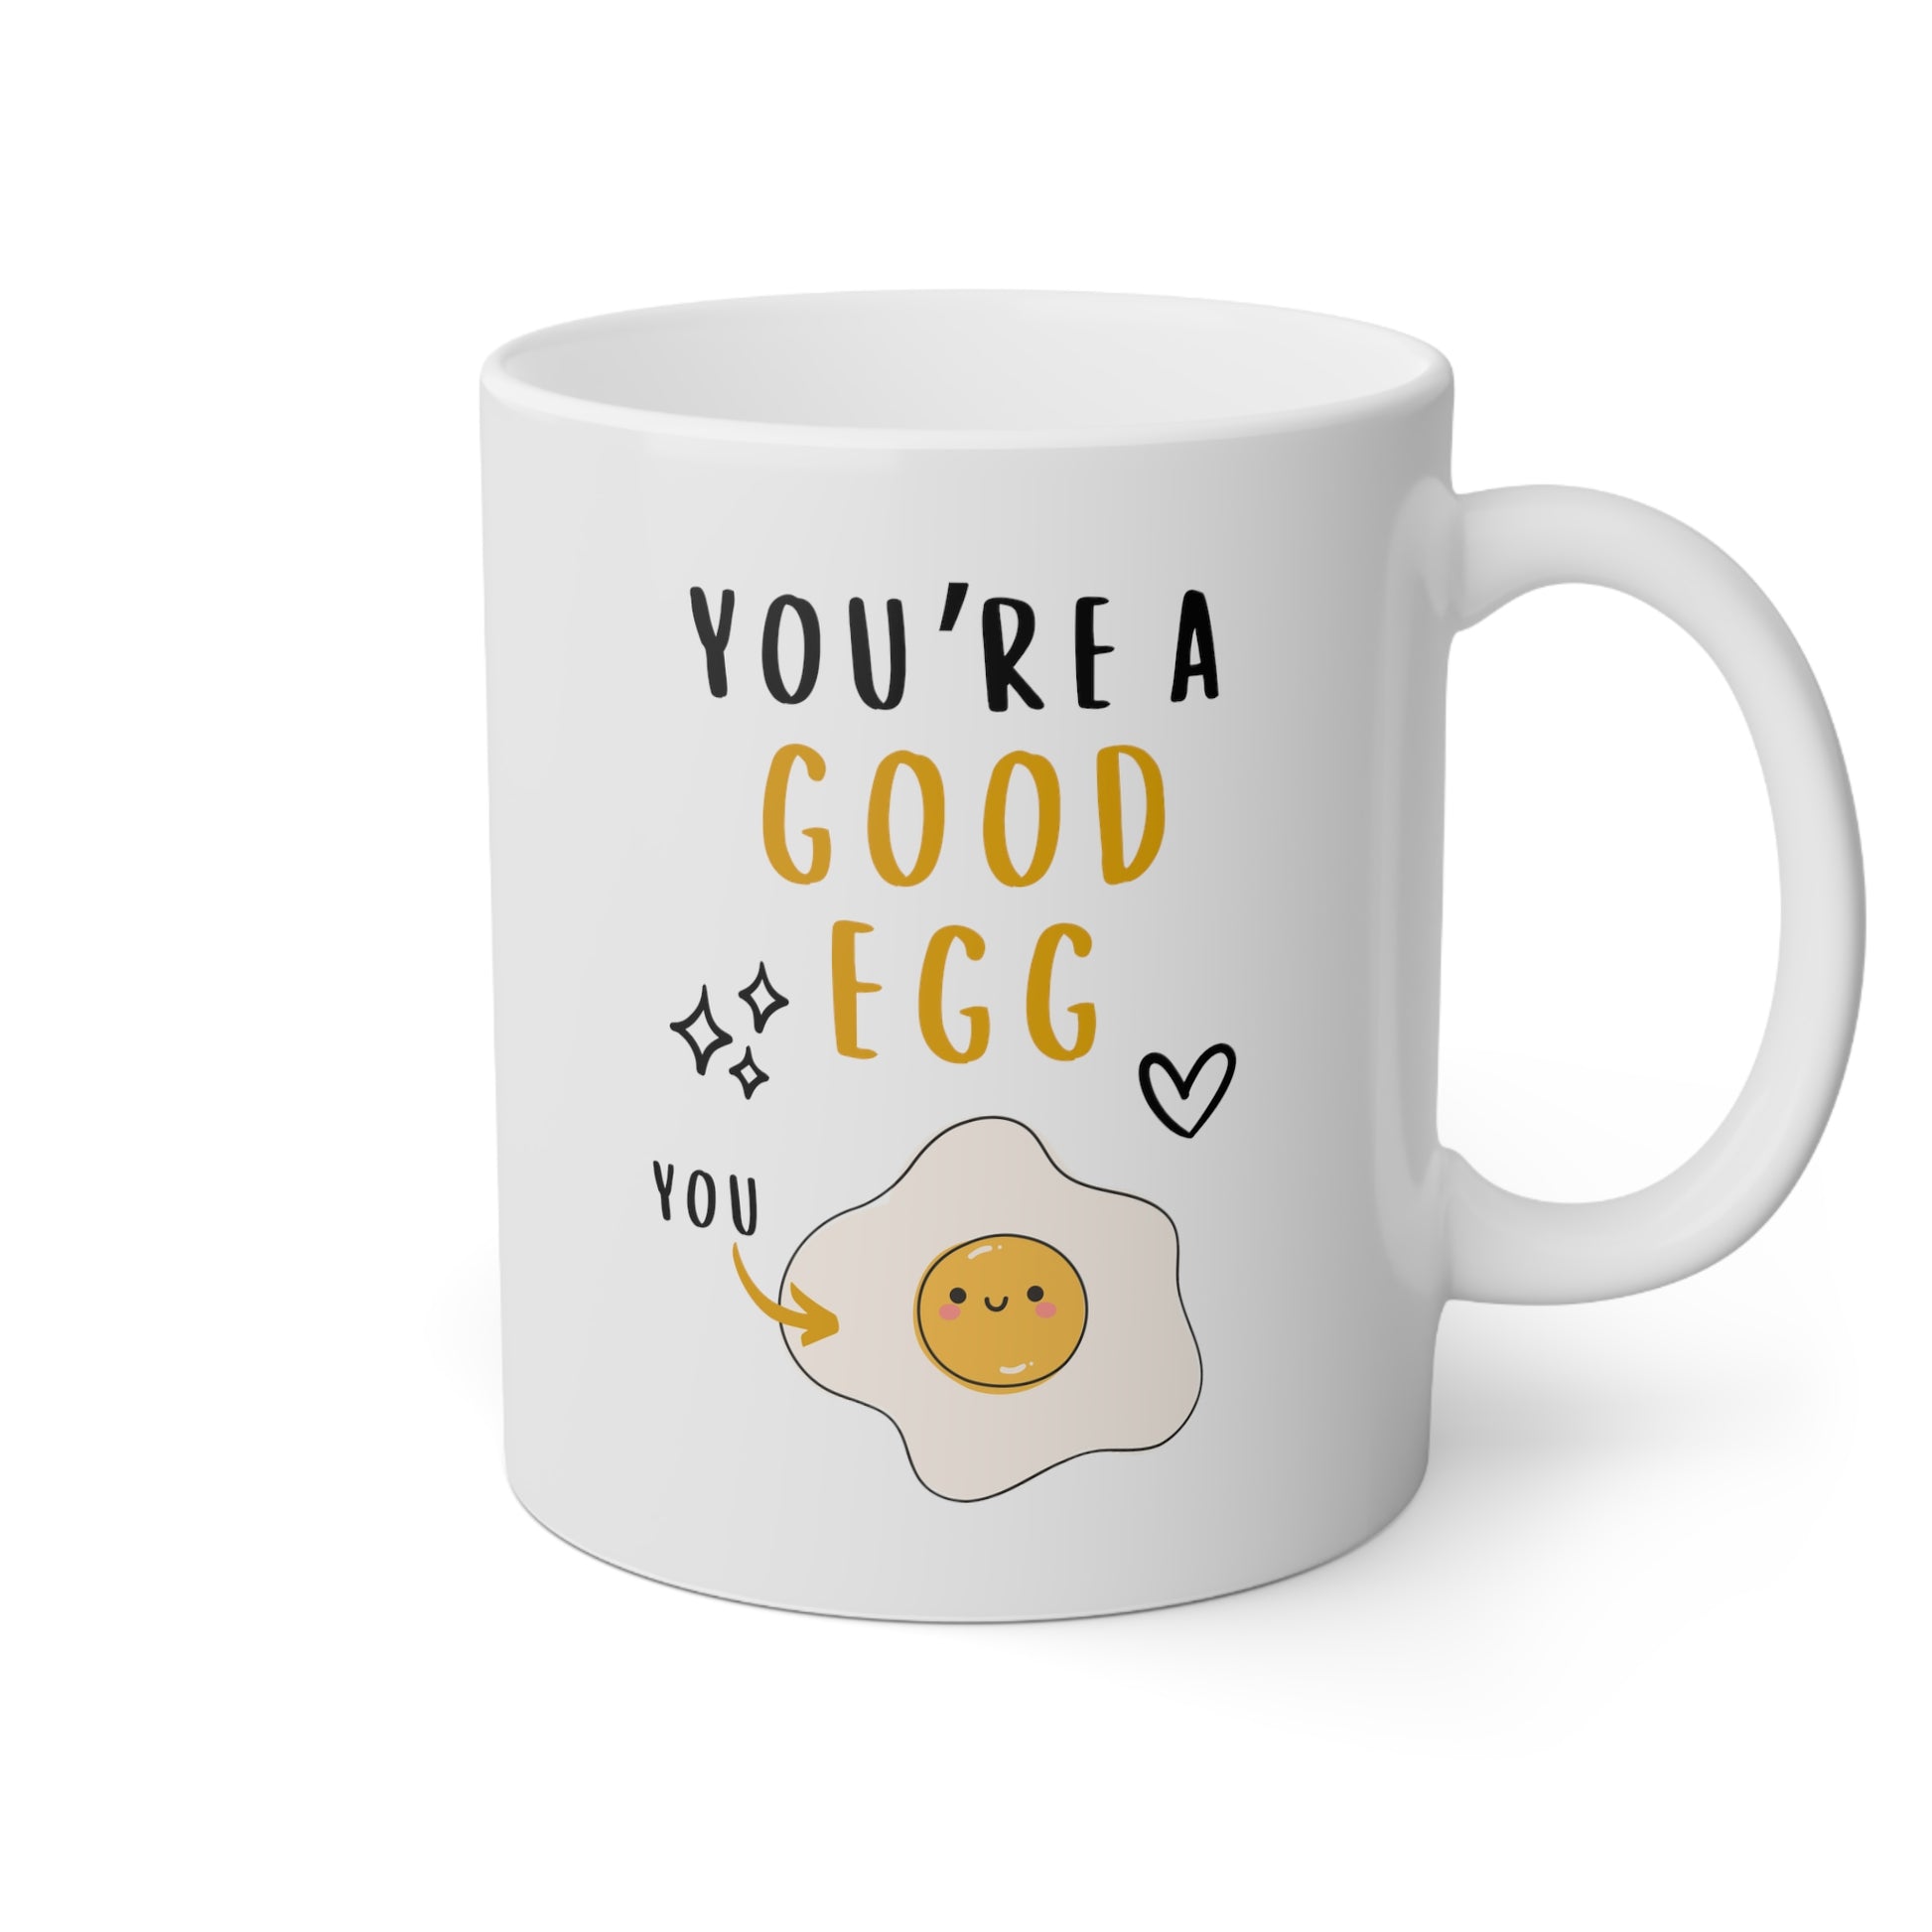 Youre a good egg 11oz white funny coffee mug tea cup gift for bff friend mothers day gift waveywares wavey wares wavywares wavy wares